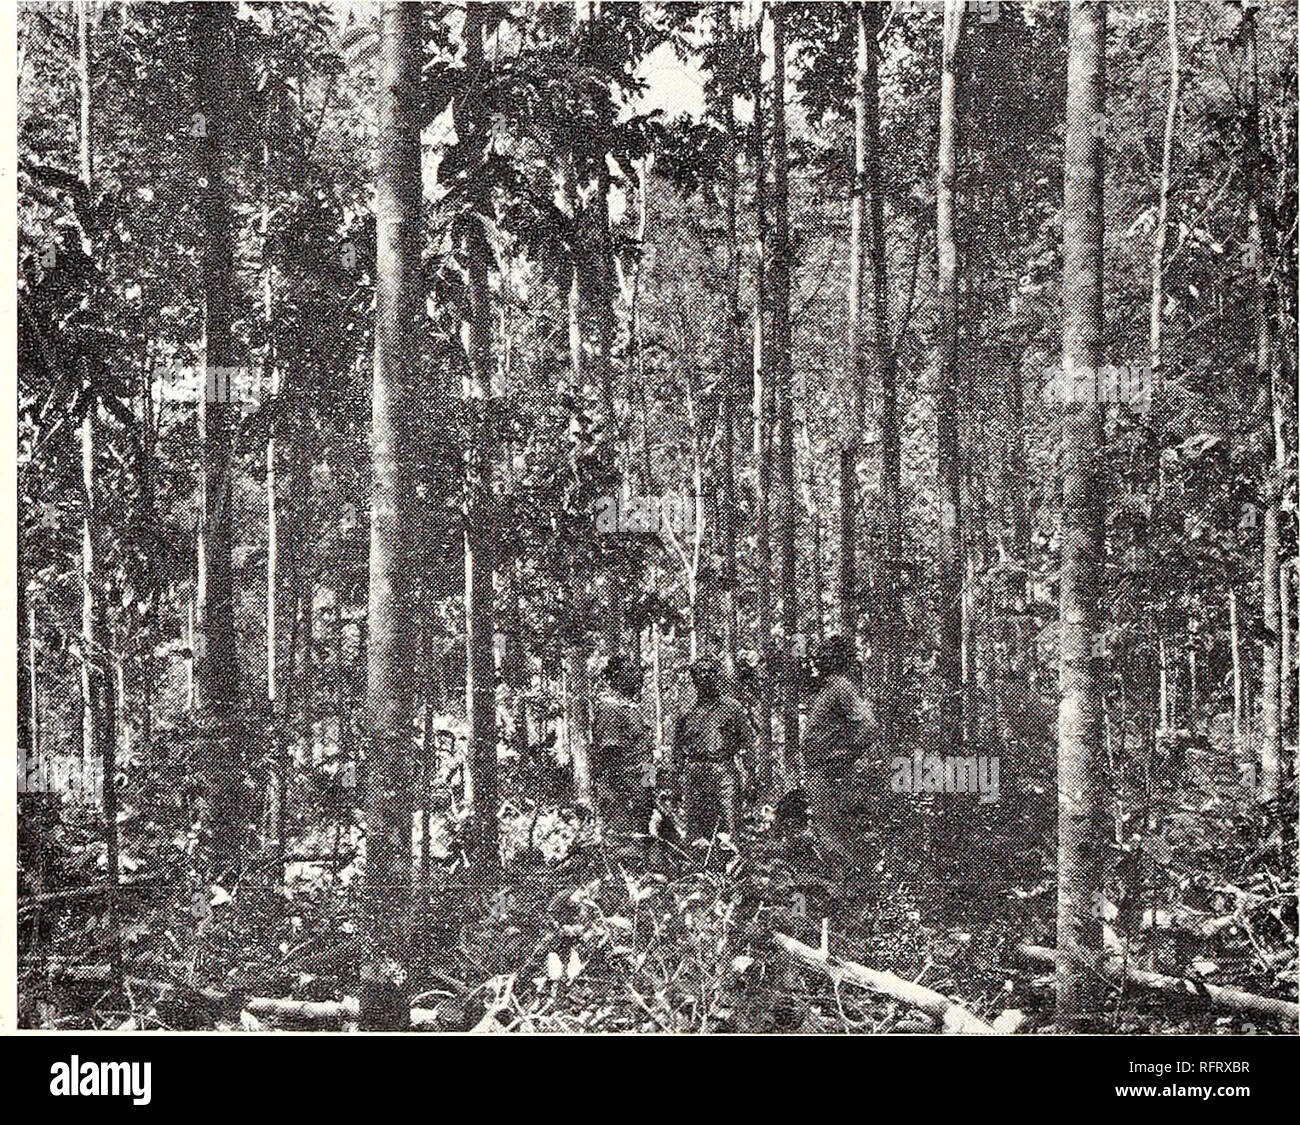 The Caribbean forester. Forests and forestry Caribbean Area Periodicals;  Forests and forestry Tropics Periodicals. Fig. 3.—Young jorest of the  Tabonuco Type 2 years after improvement cut- ting showing the dense flush